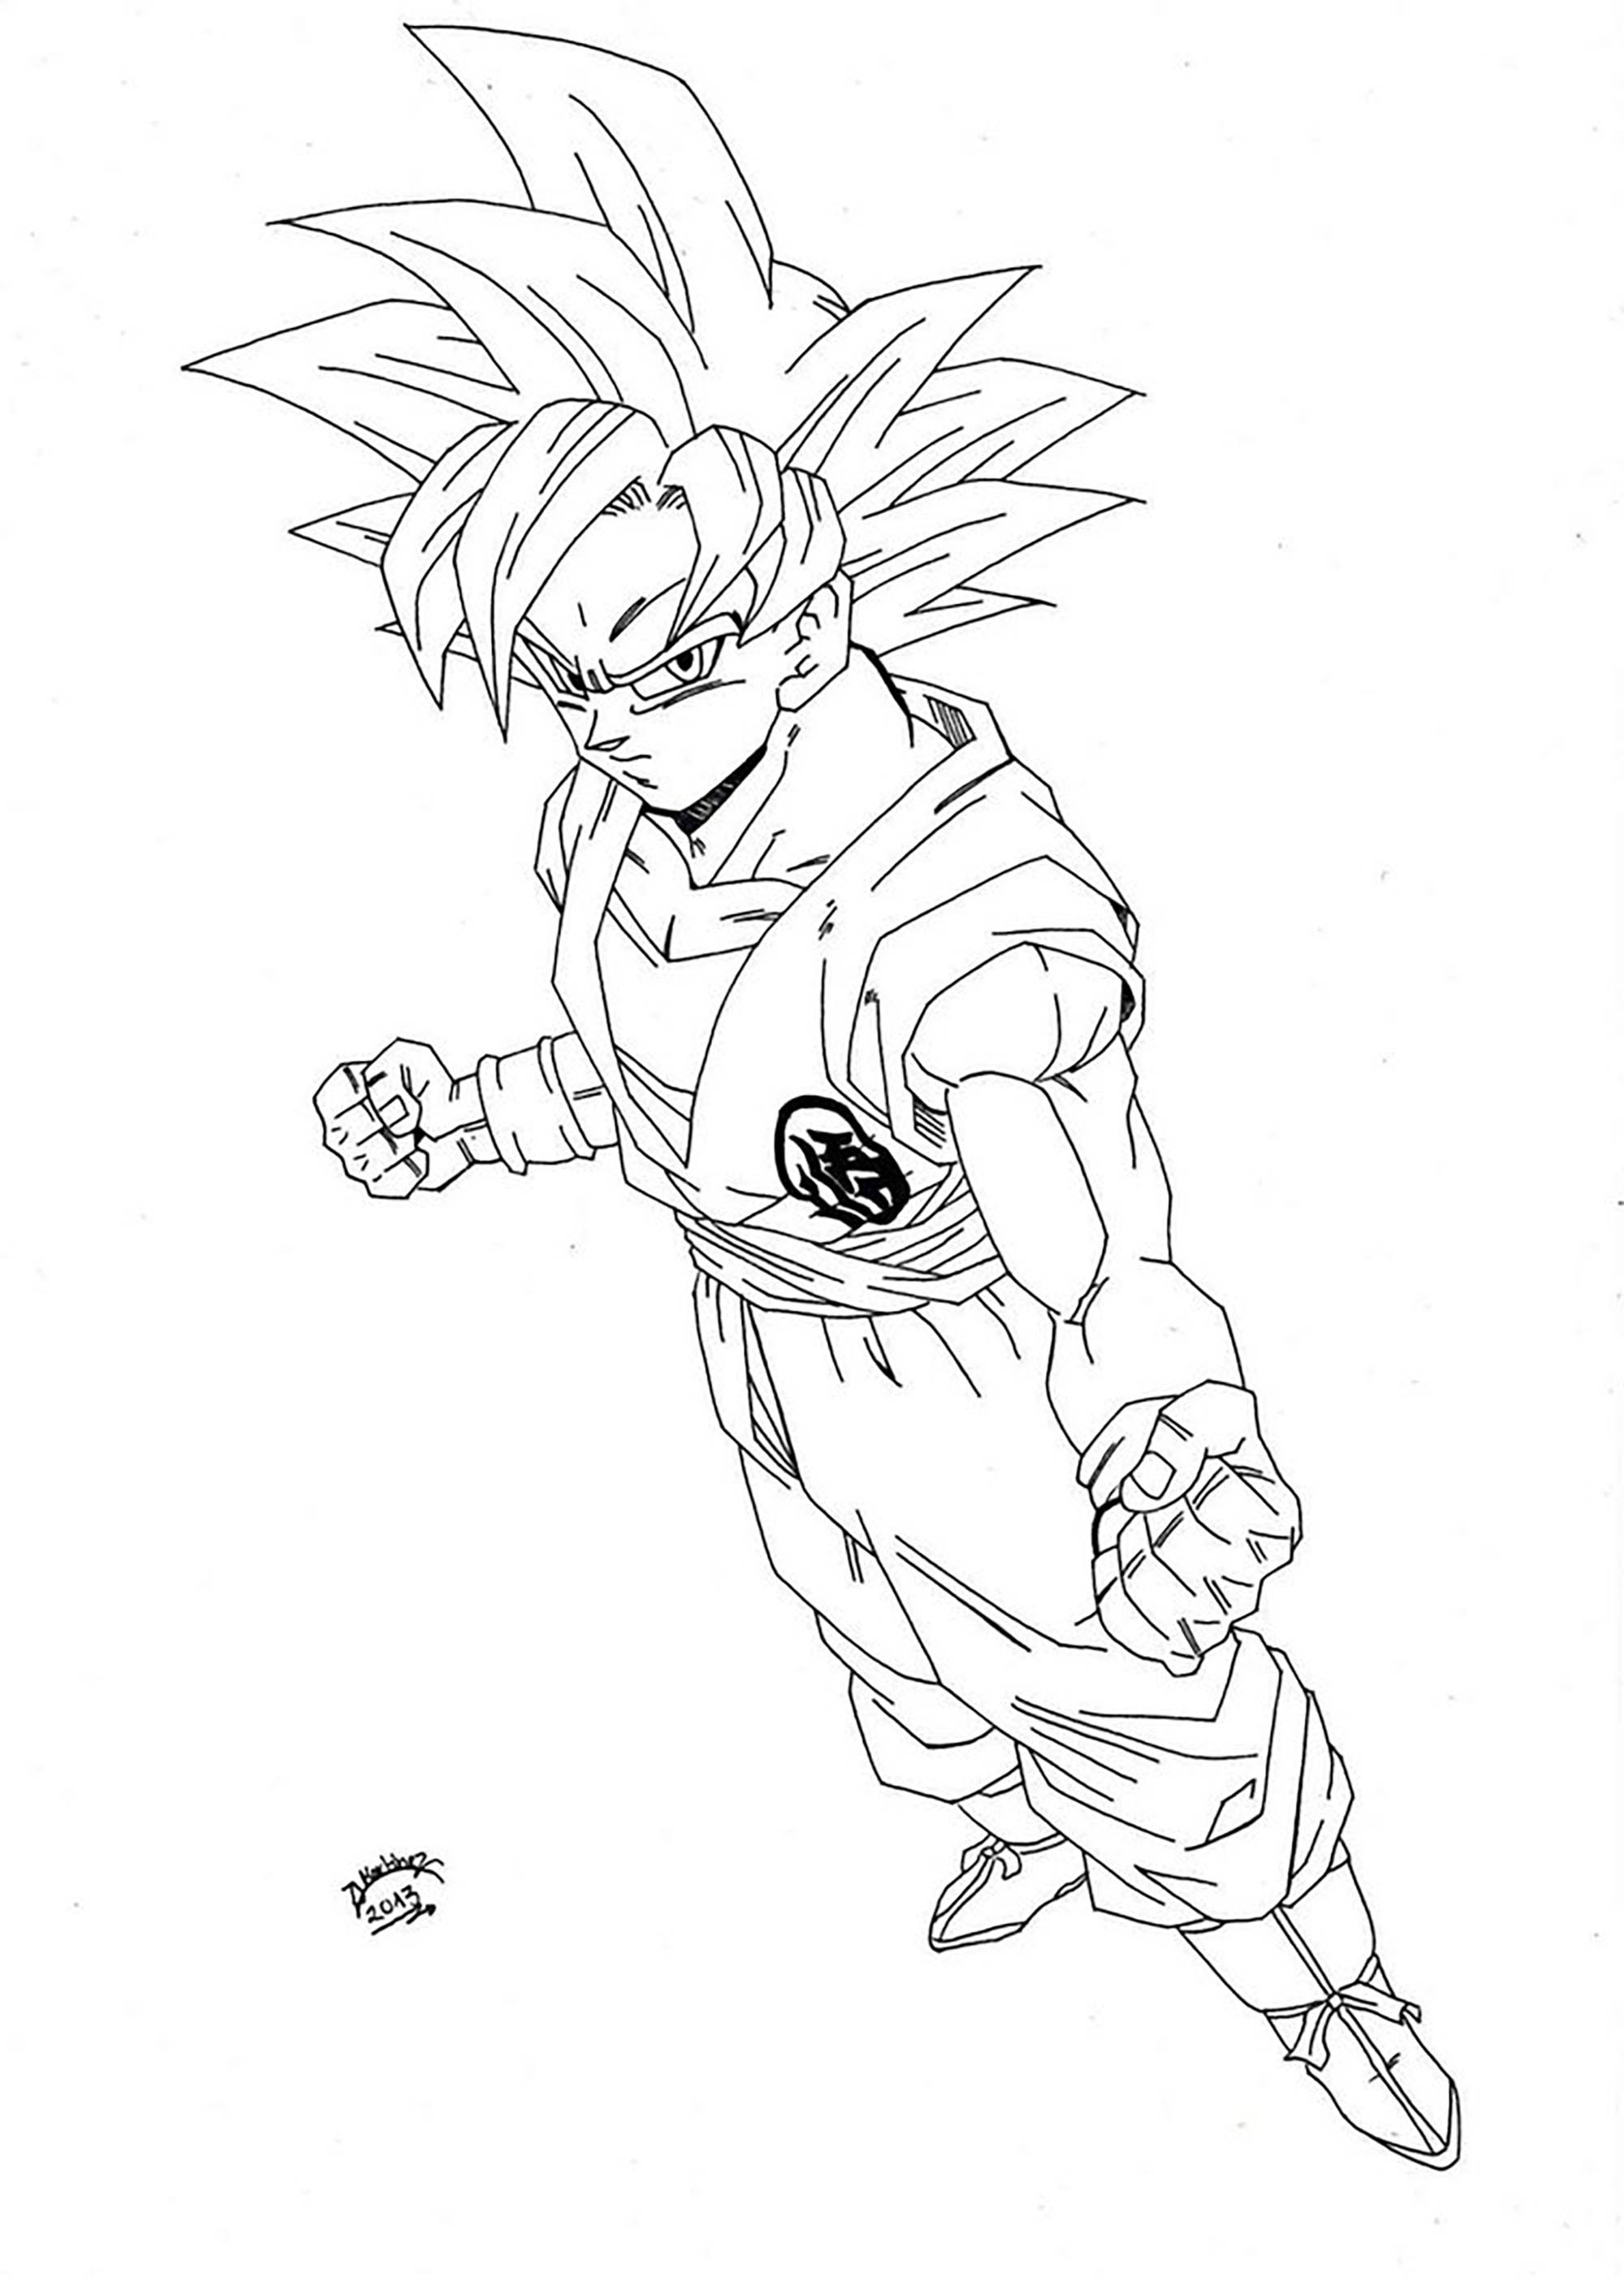 https://www.justcolor.net/ninos/wp-content/uploads/sites/25/nggallery/dragon-ball-z/dibujos-para-colorear-para-ninos-de-dragon-ball-z-82791.jpg